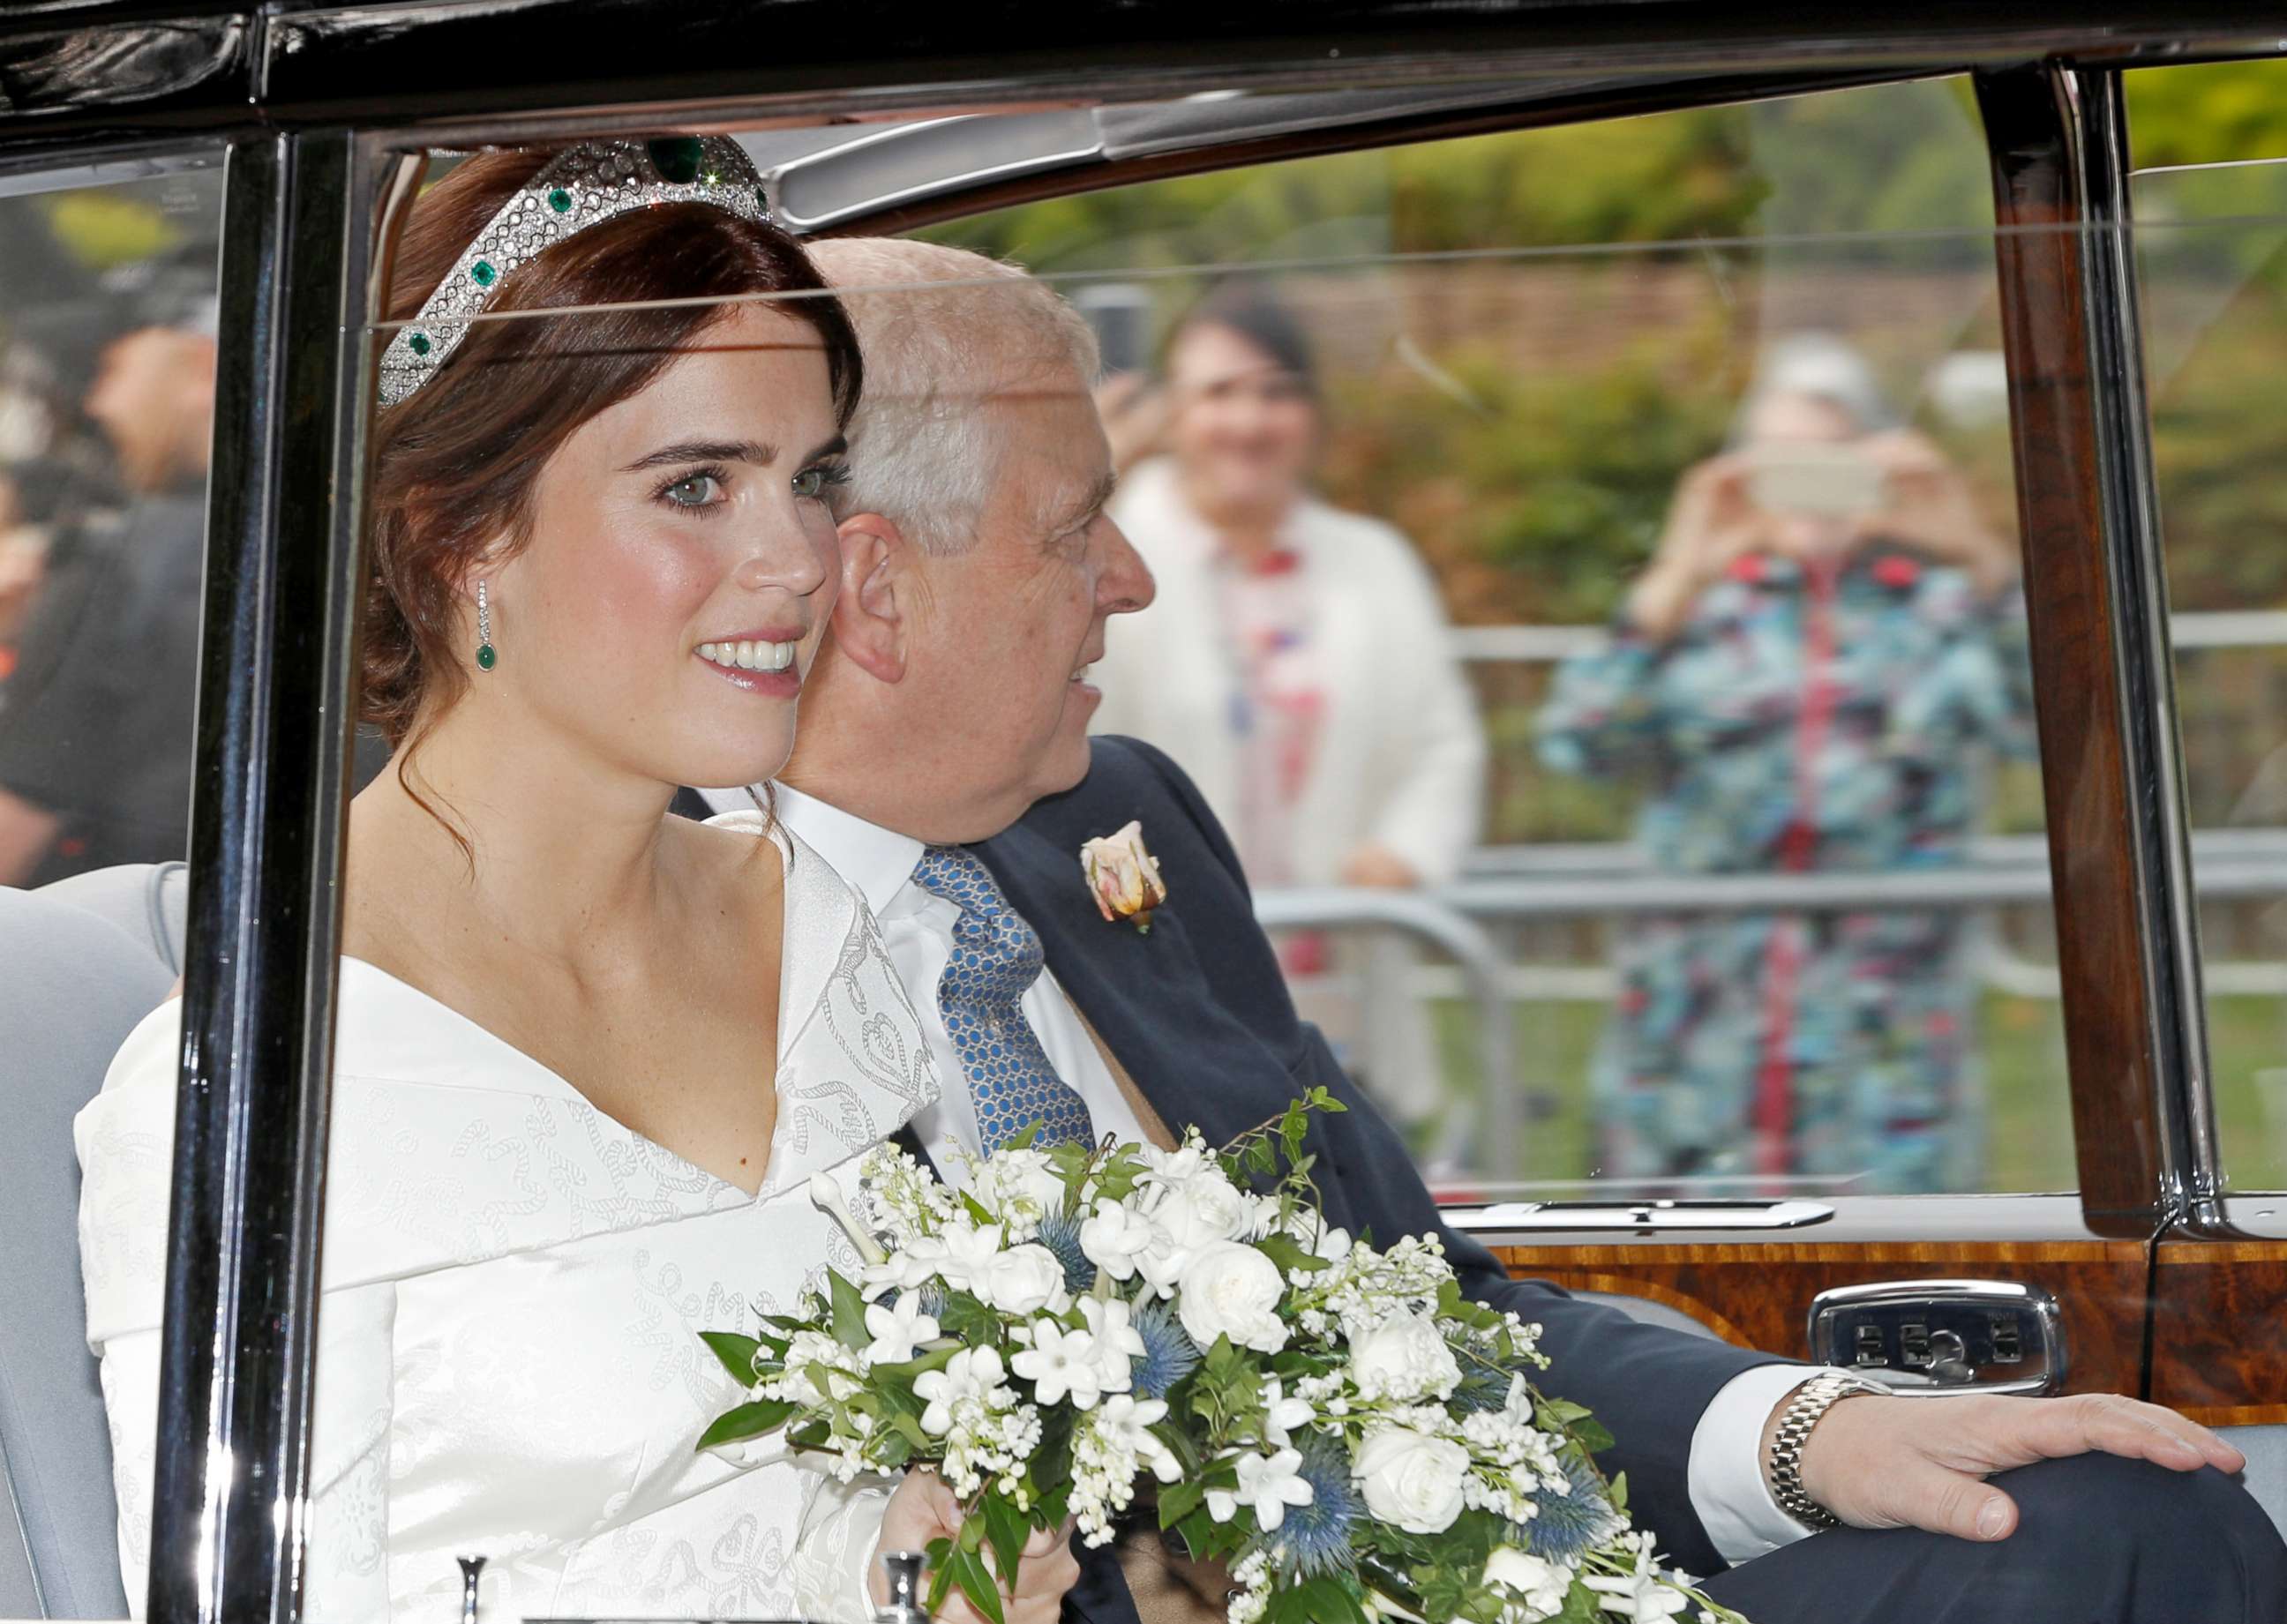 PHOTO: Princess Eugenie is driven towards St George's Chapel with her father Prince Andrew, Duke of York, for her wedding to Jack Brooksbank at Windsor Castle, Oct. 12, 2018.